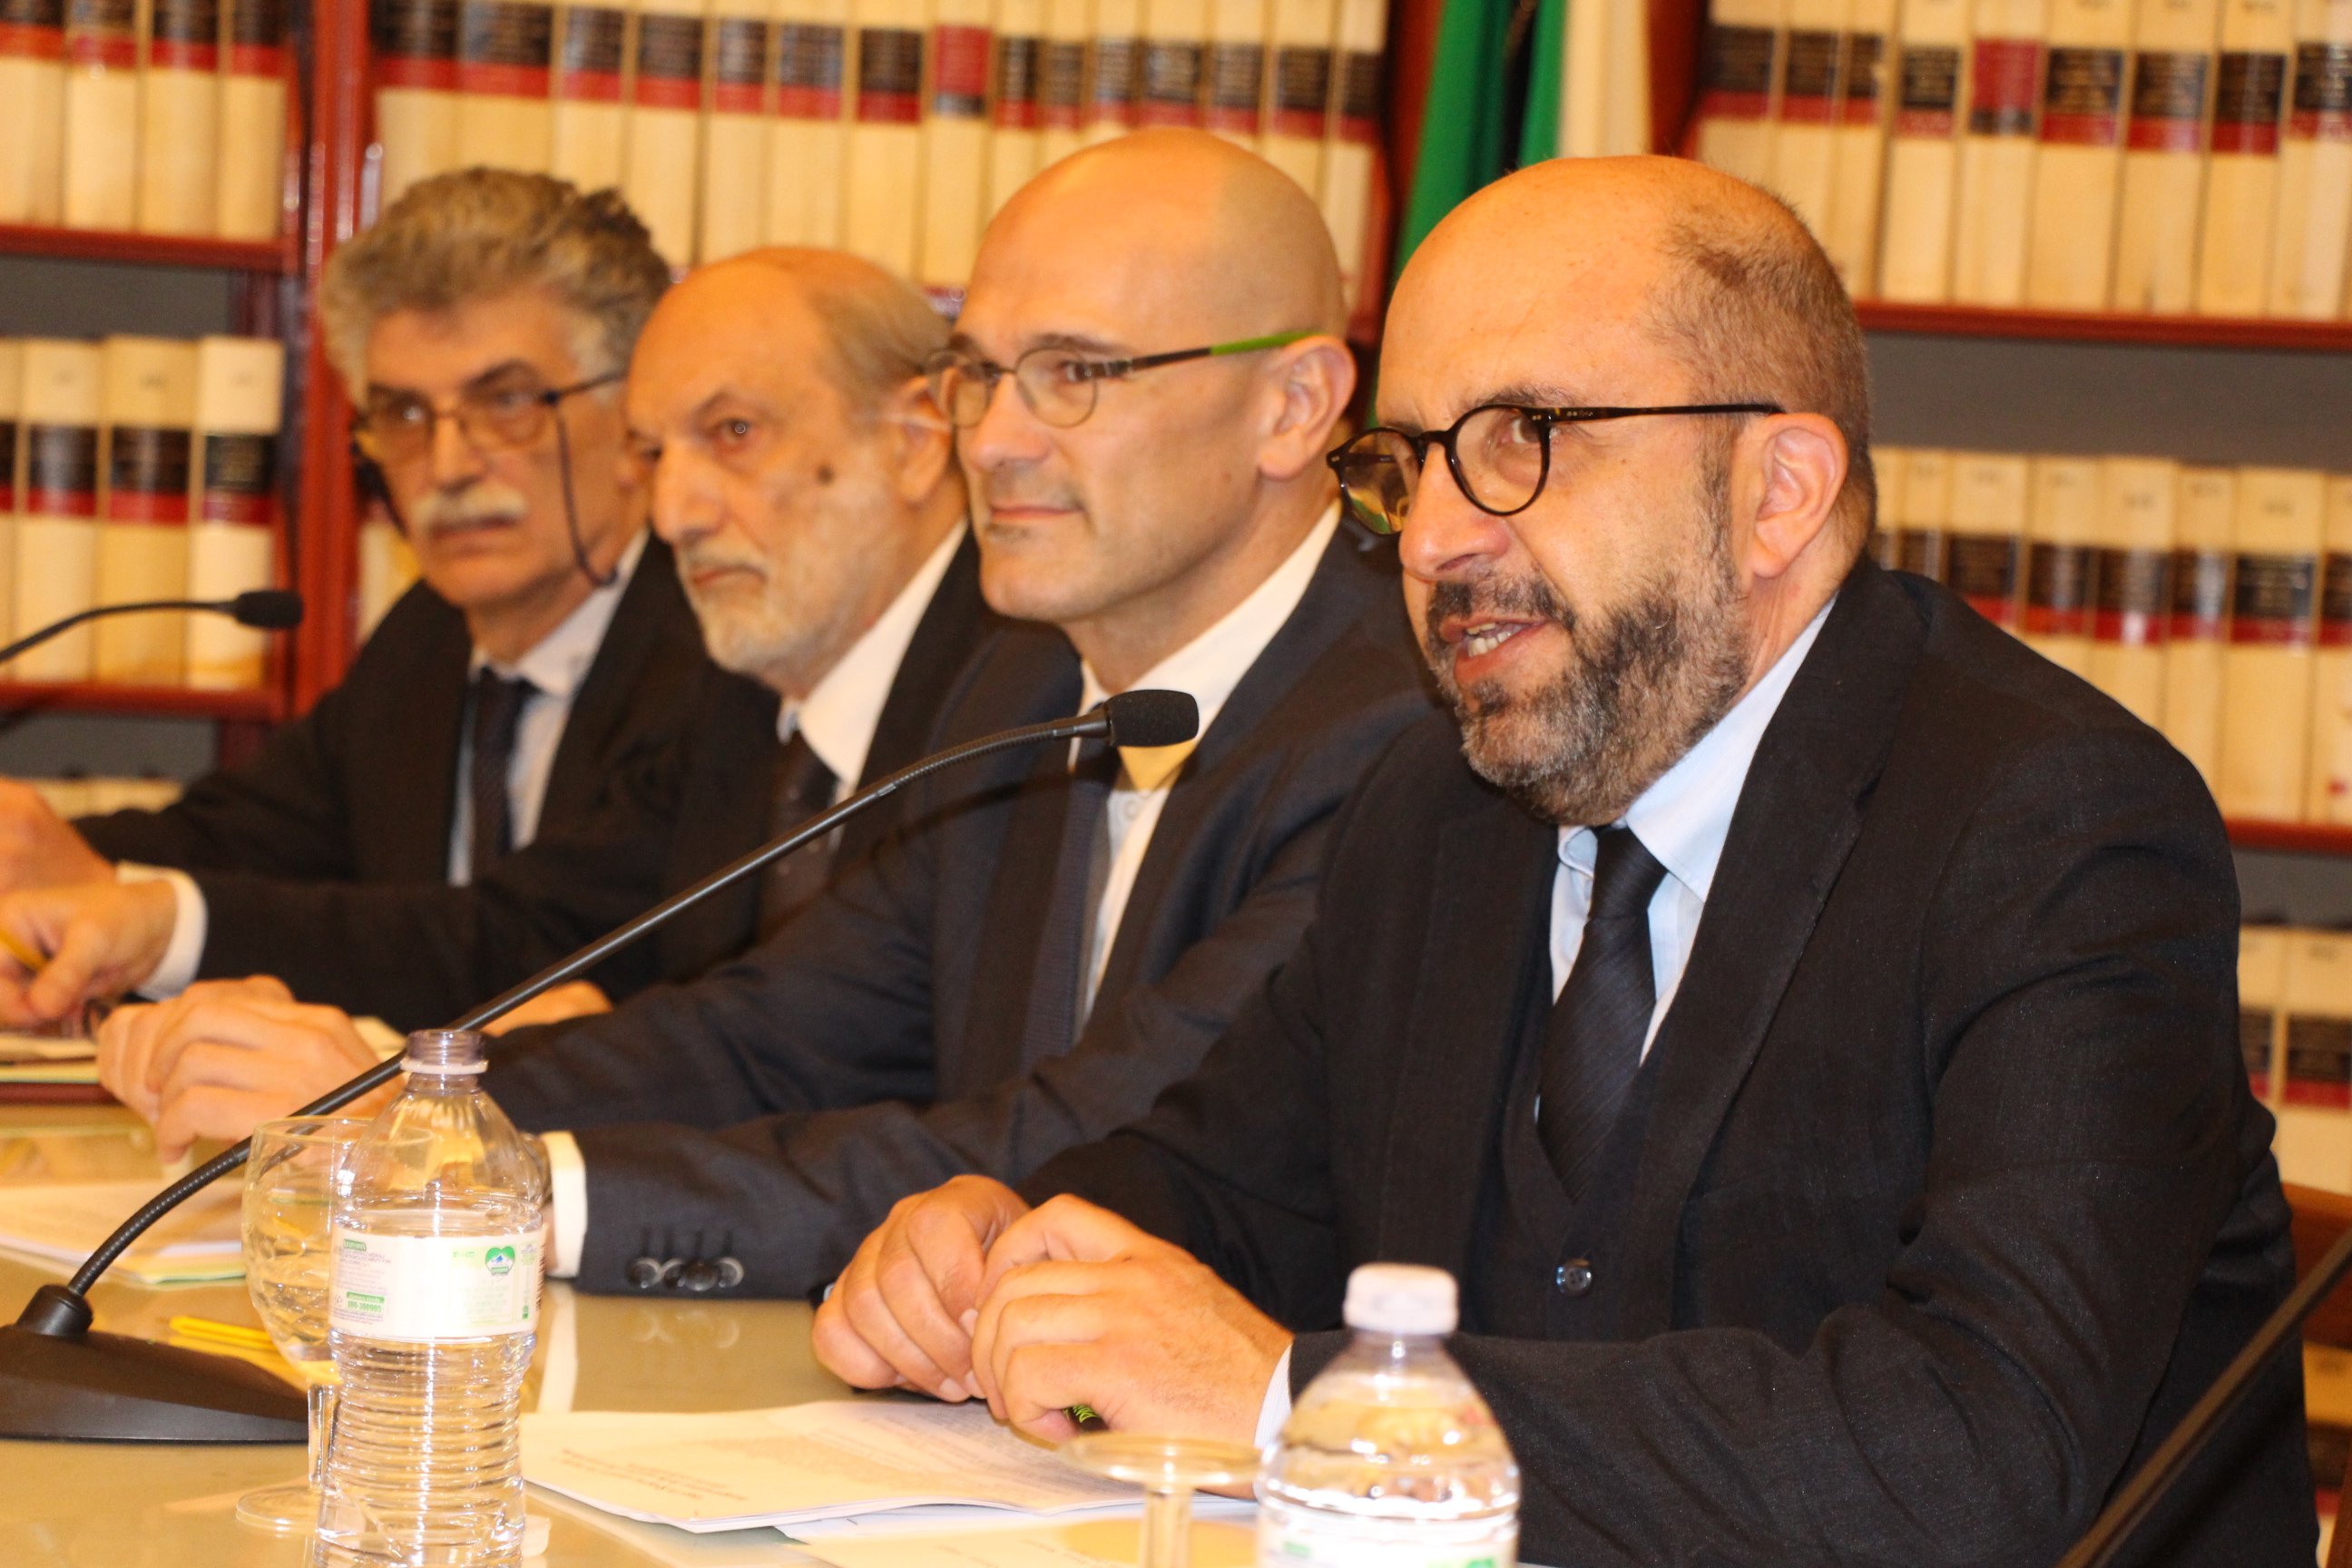 Italian Democratic Party MP Marco Miccoli, together with the Catalan Minister for Foreign Affairs Raül Romeva at the presentation of the 'Catalogna Bombardata' exhibition in Rome (by ACN)